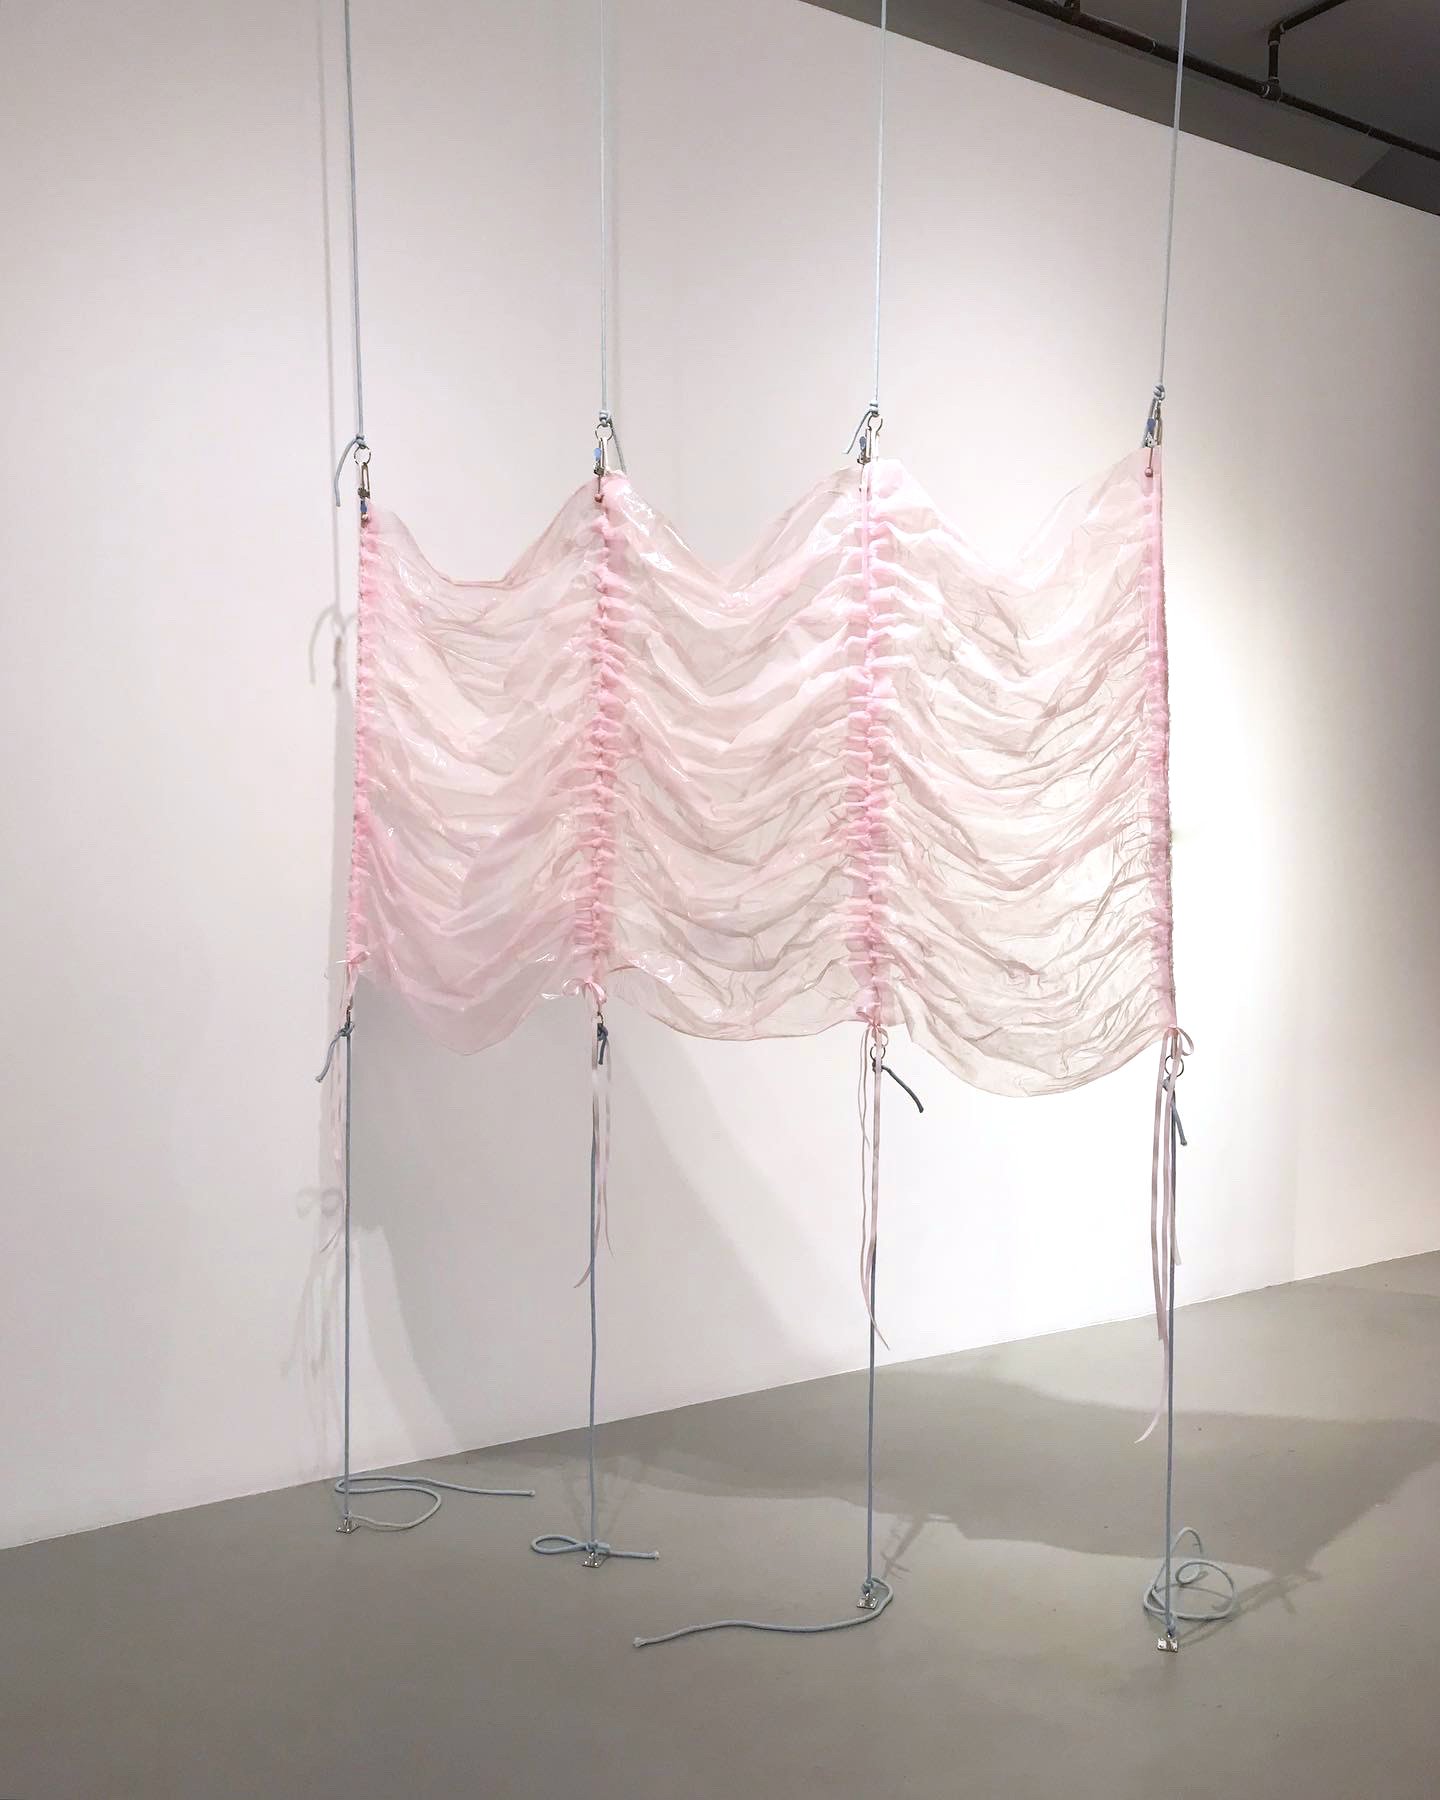  Karinne Smith  Untitled , 2022  collagen, silicone, ribbon, rope 38 x 57 inches (97 x 145 cm) KS23 